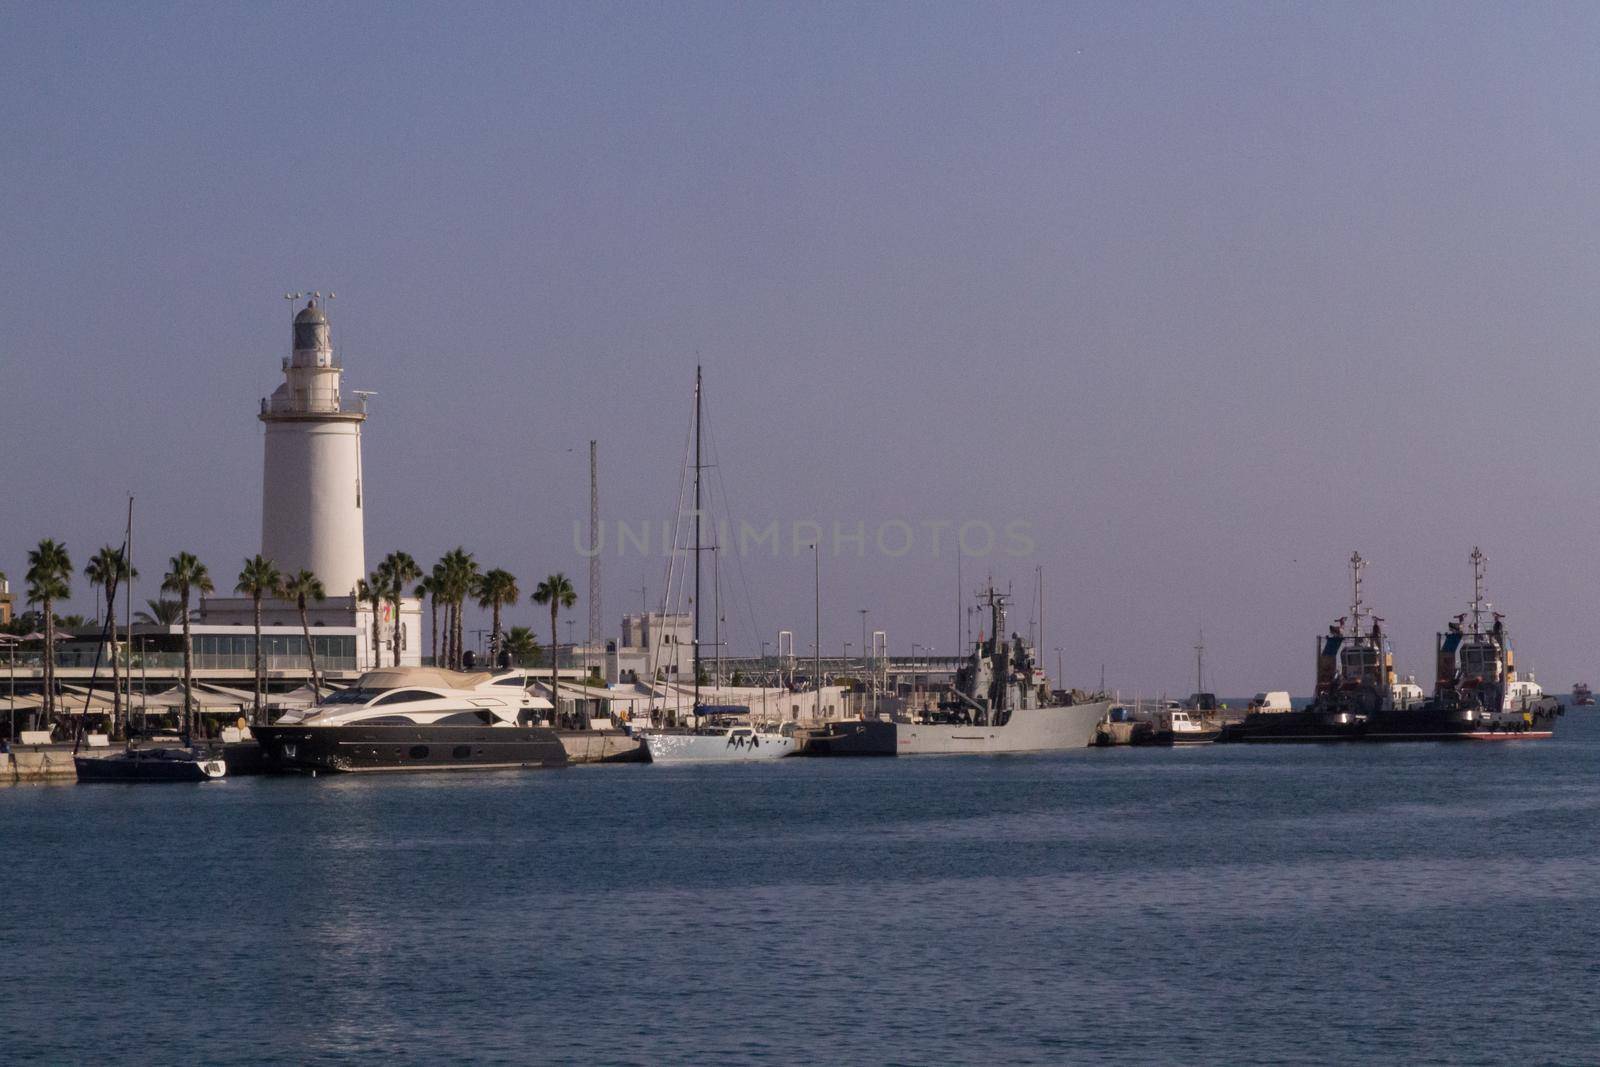 Wide-shot of the dock in a port with siailing boats moored and a white lighthouse